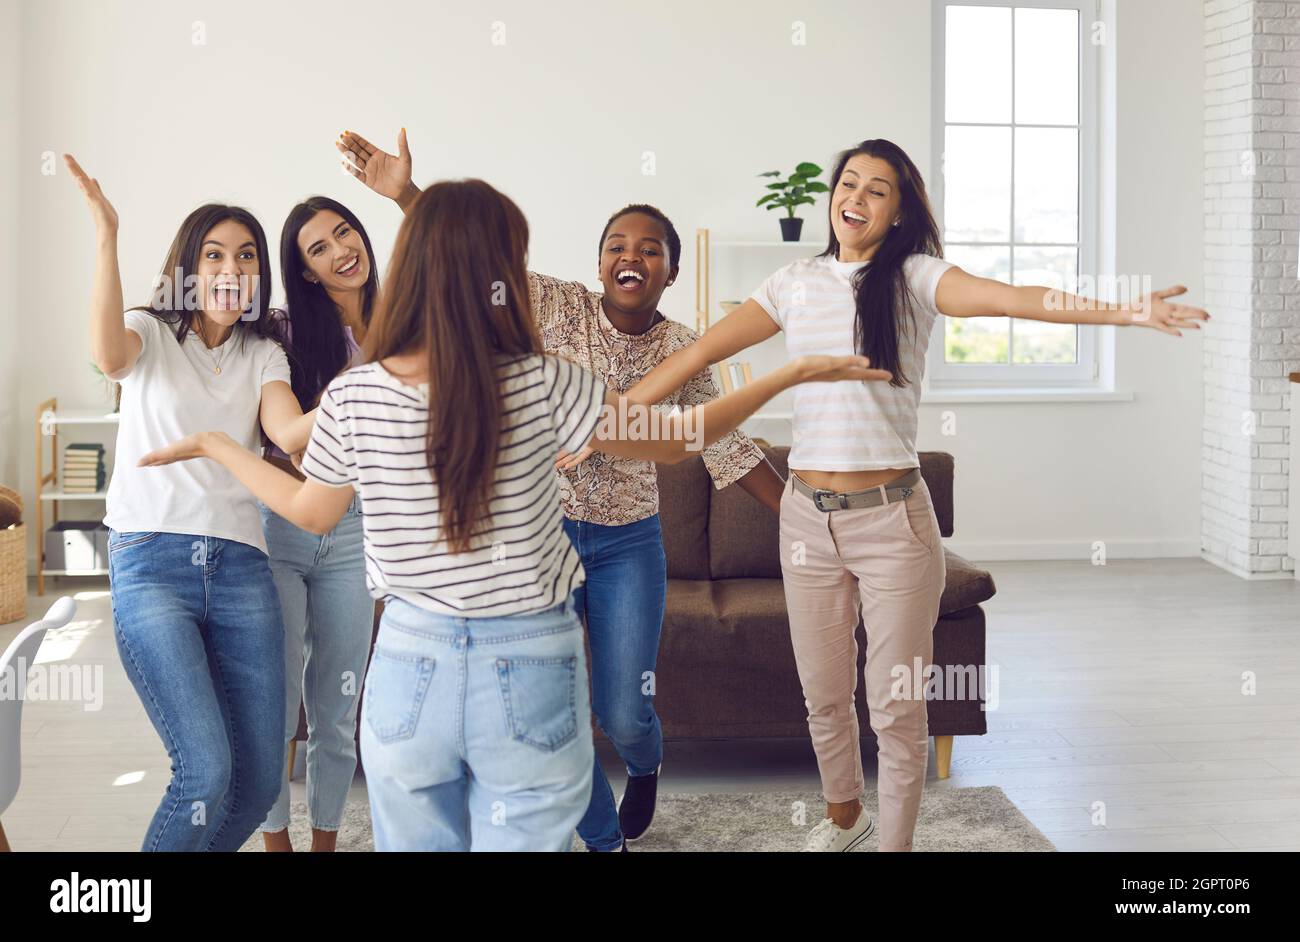 Happy group of young multinational women greet and hug their female friend during meeting at home. Stock Photo